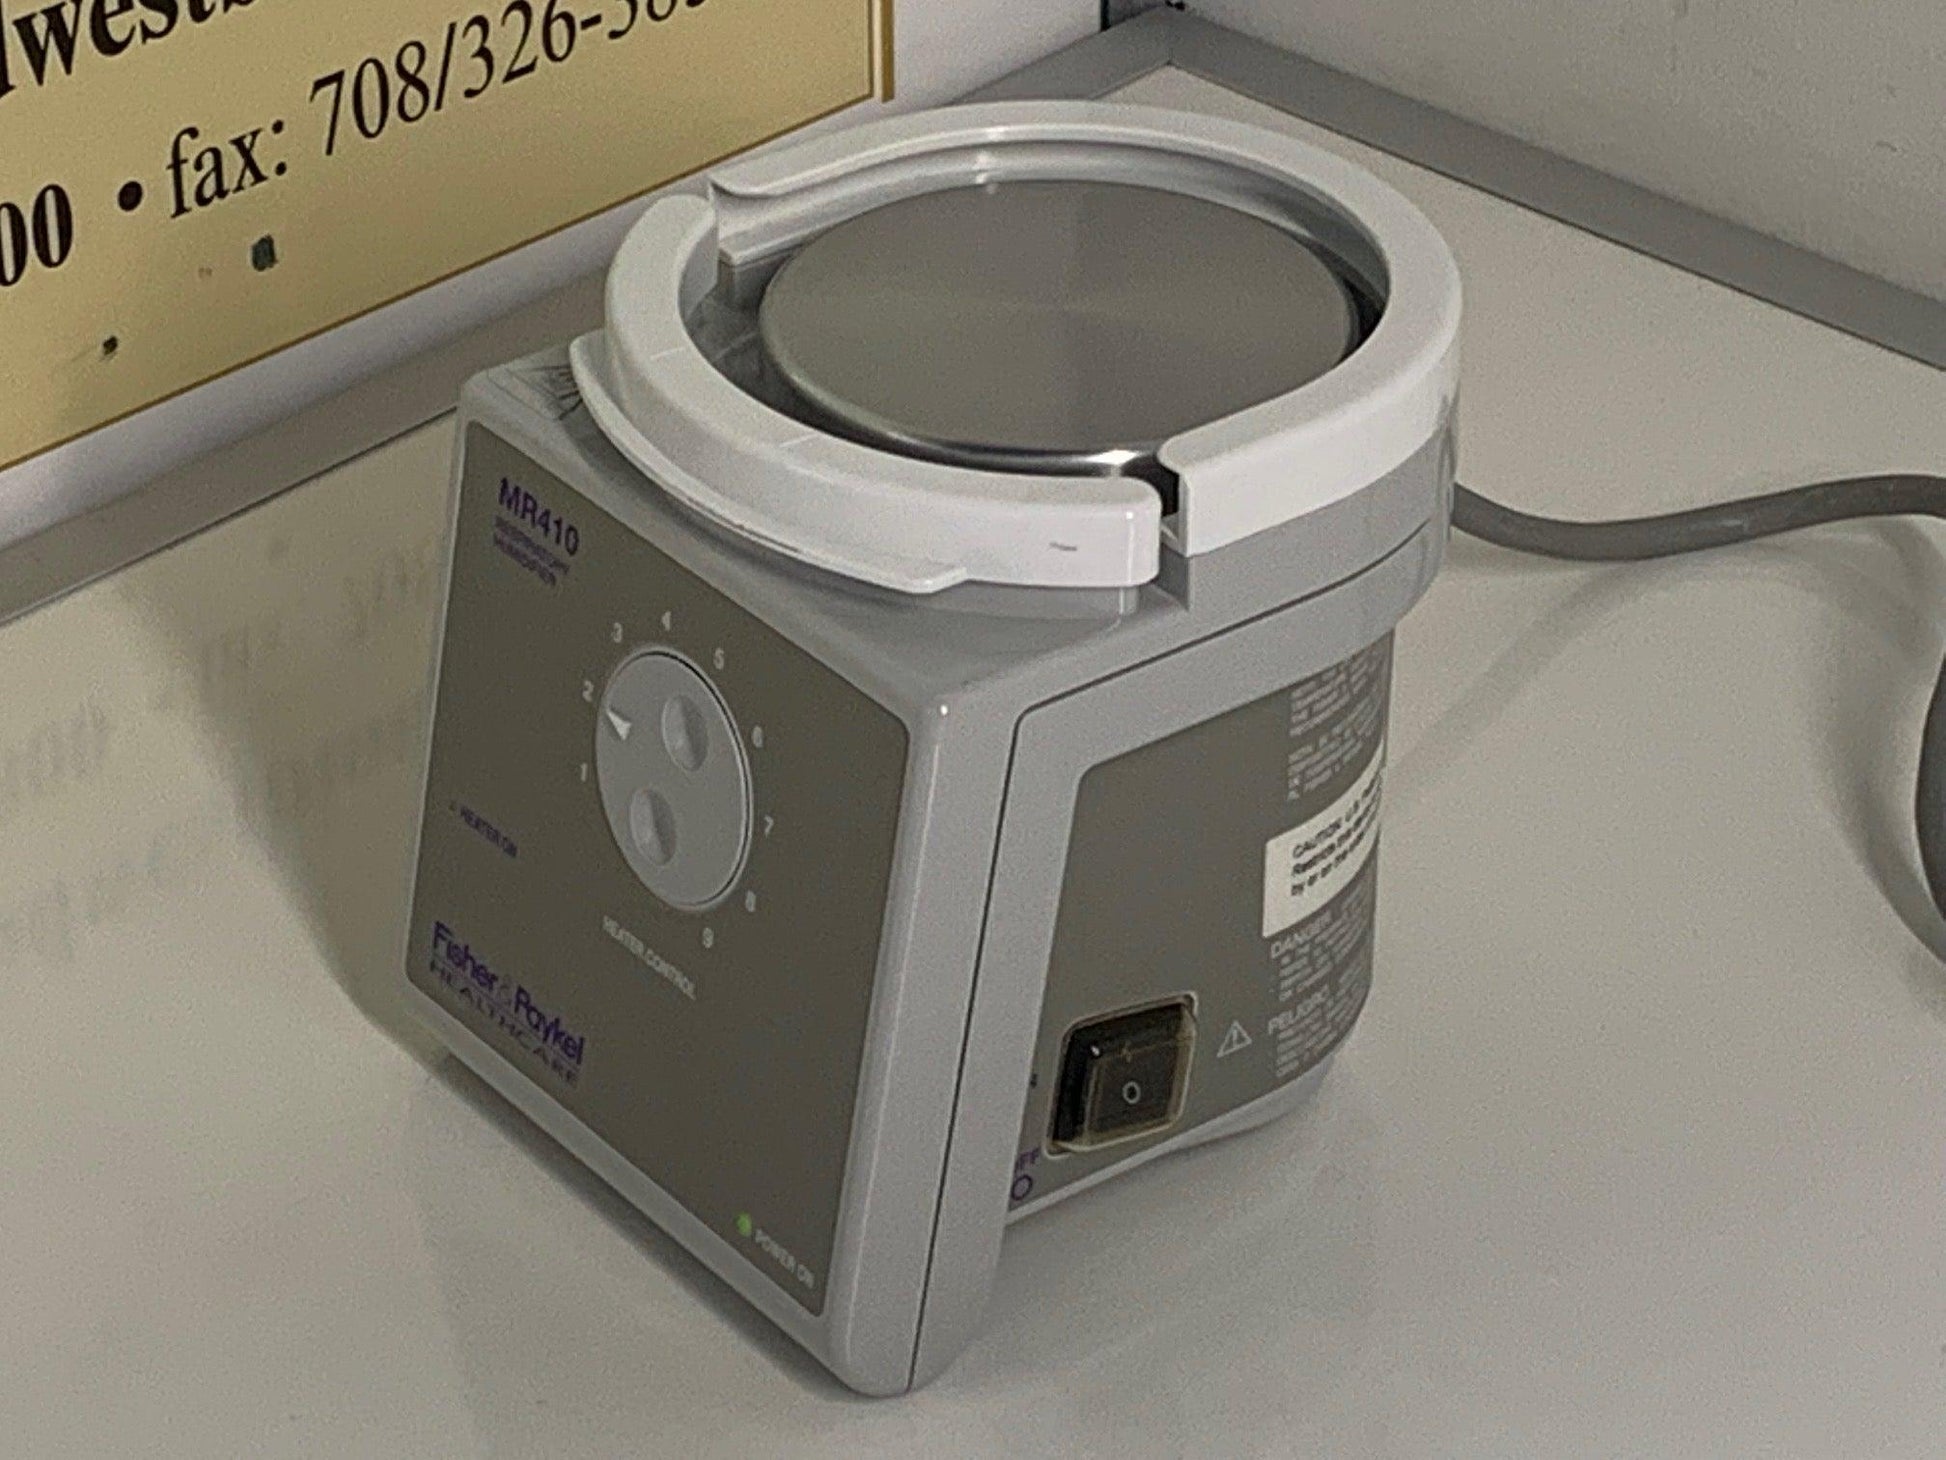 Used Fisher & Paykel Heated Respiratory Humidifier MR410JHU - MBR Medicals